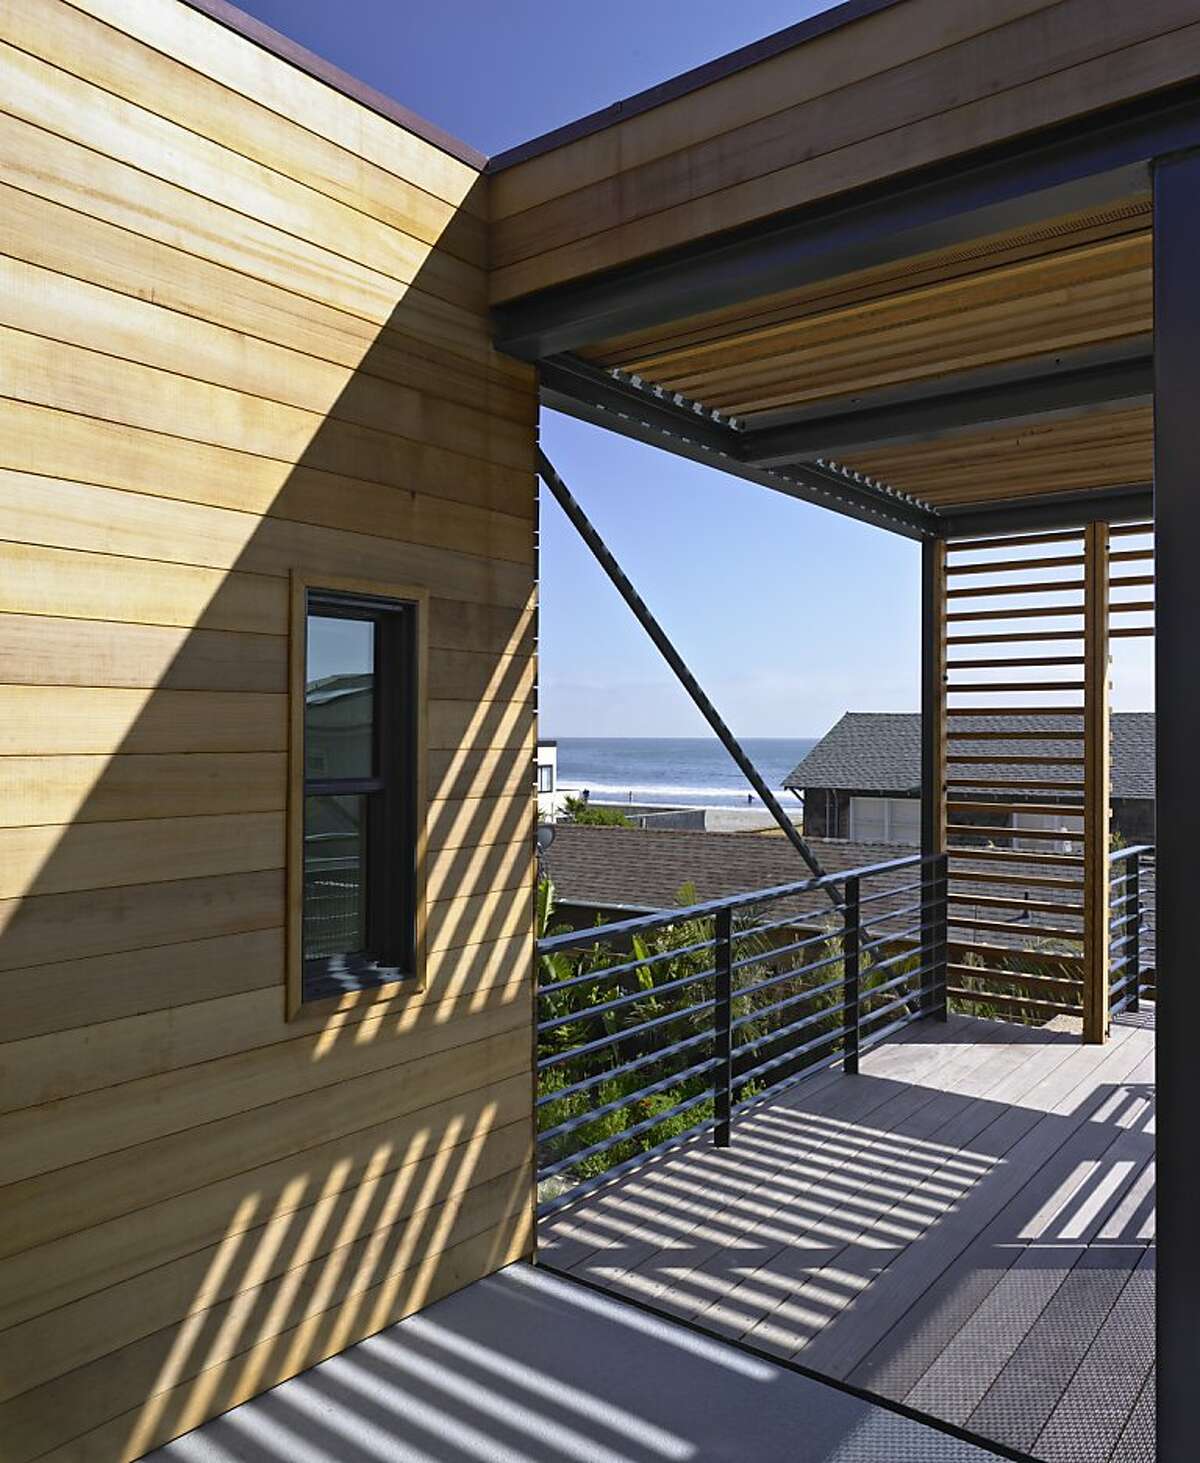 The addition, built 12 feet up, has views of the beach.